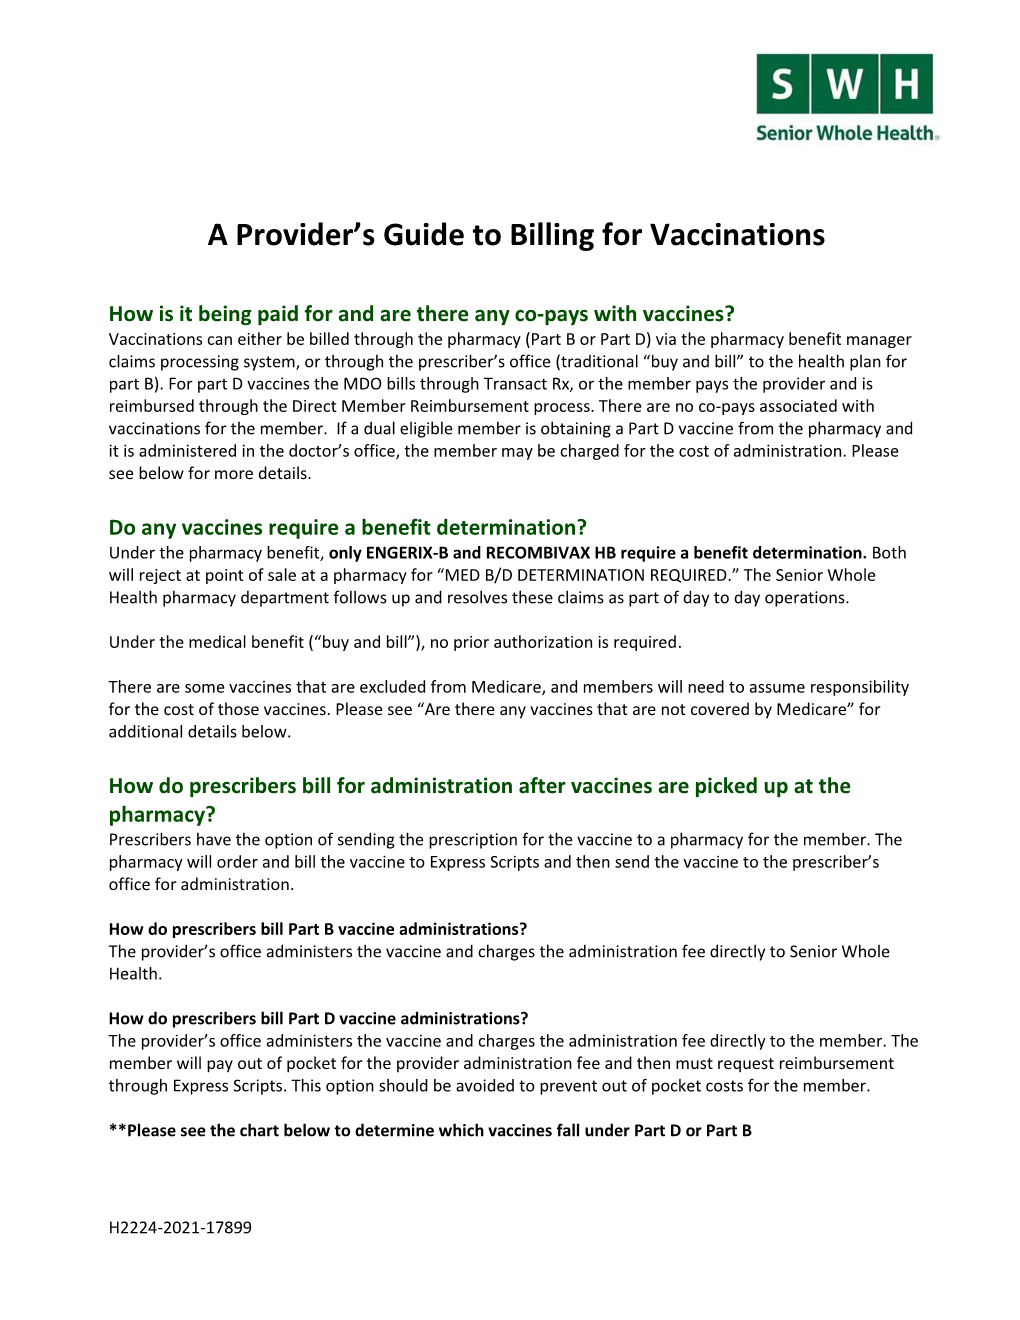 A Provider's Guide to Billing for Vaccinations